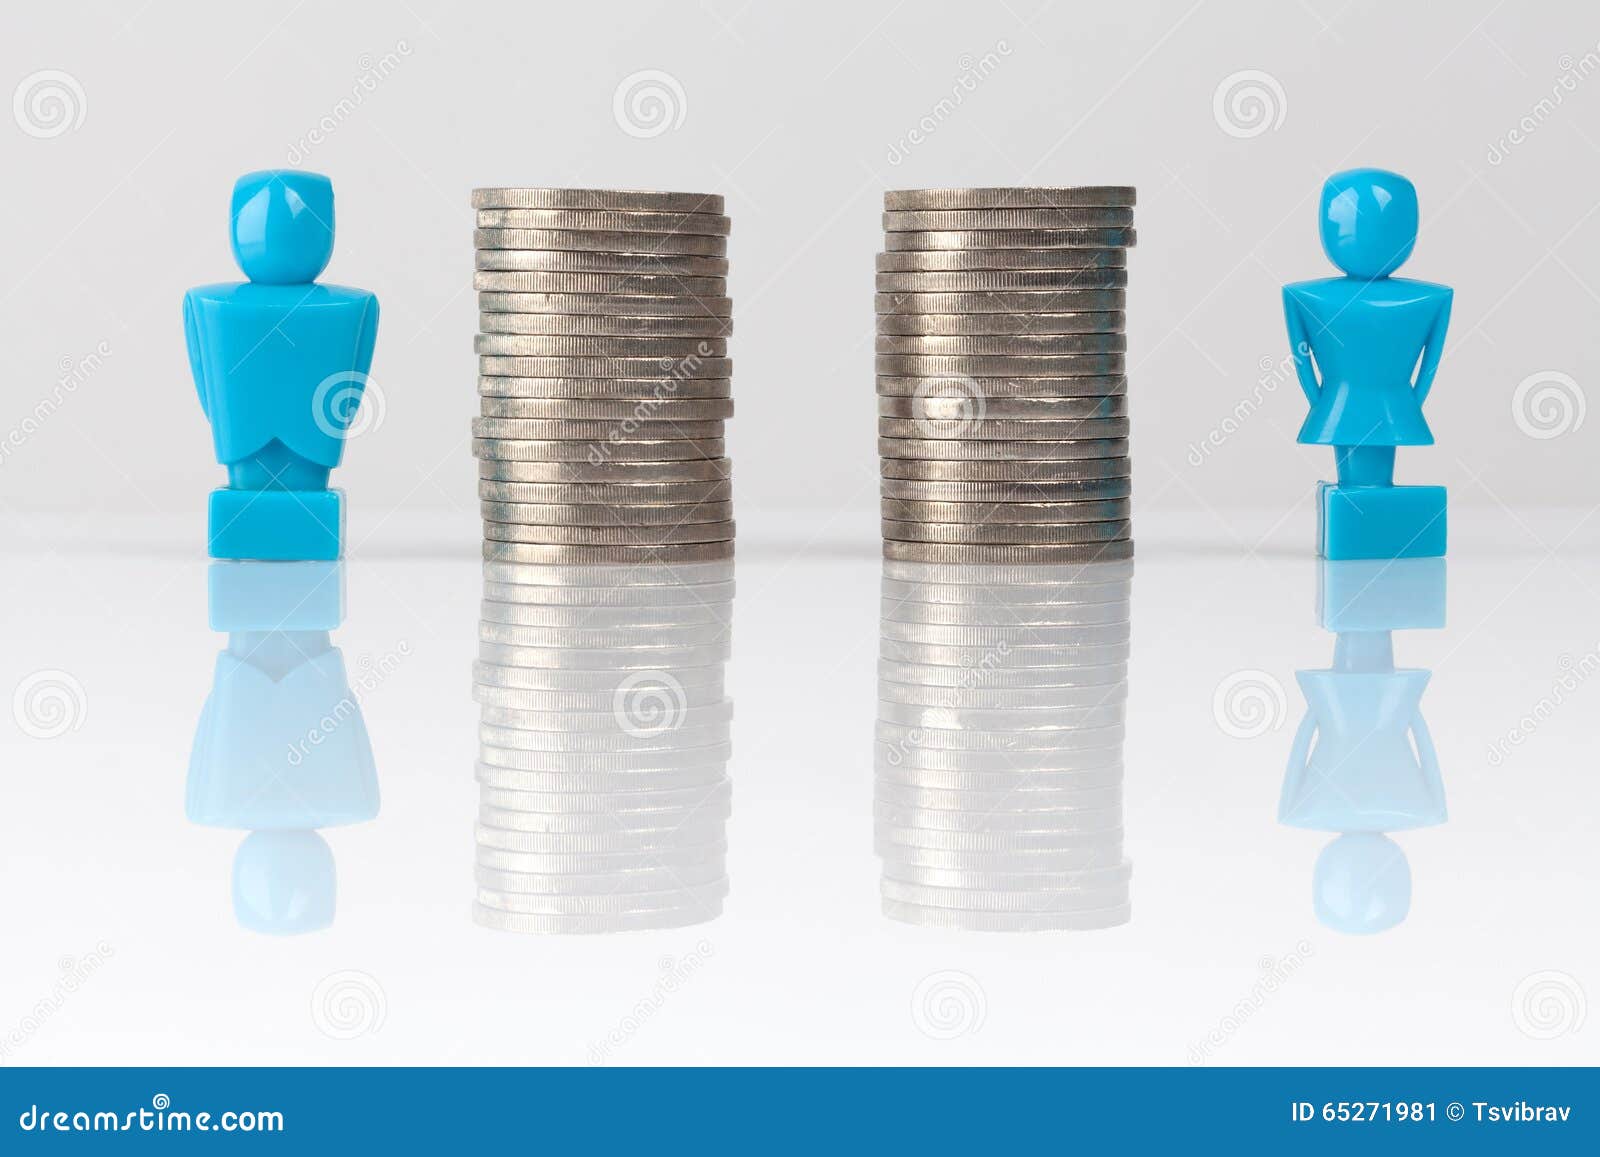 equal pay concept shown with figurines and coins